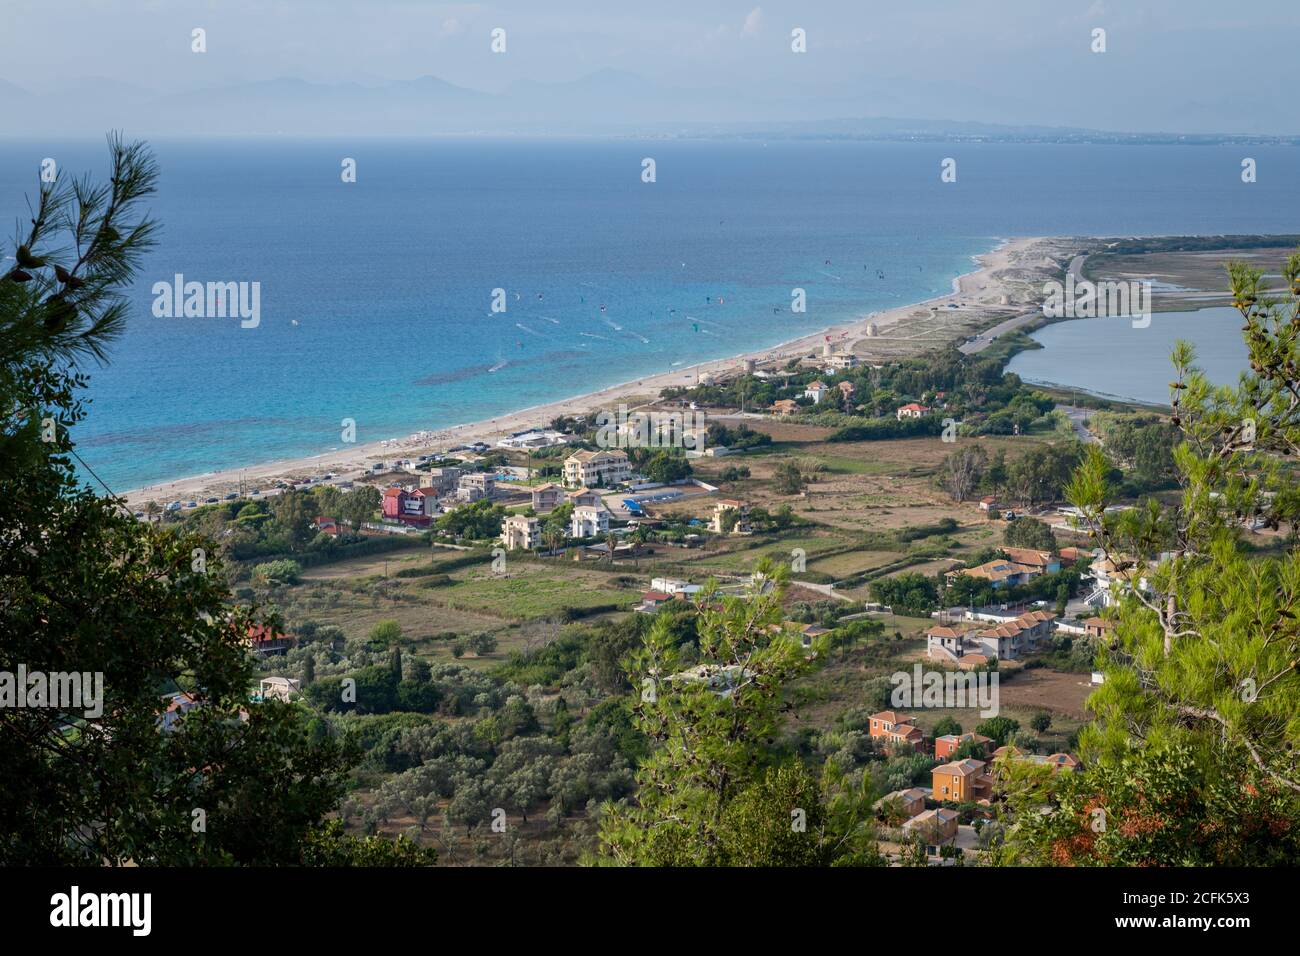 A hillside view of Agios Ioannis beach in Gyra, the location for kite surfing on this Ionian Greek island. Stock Photo